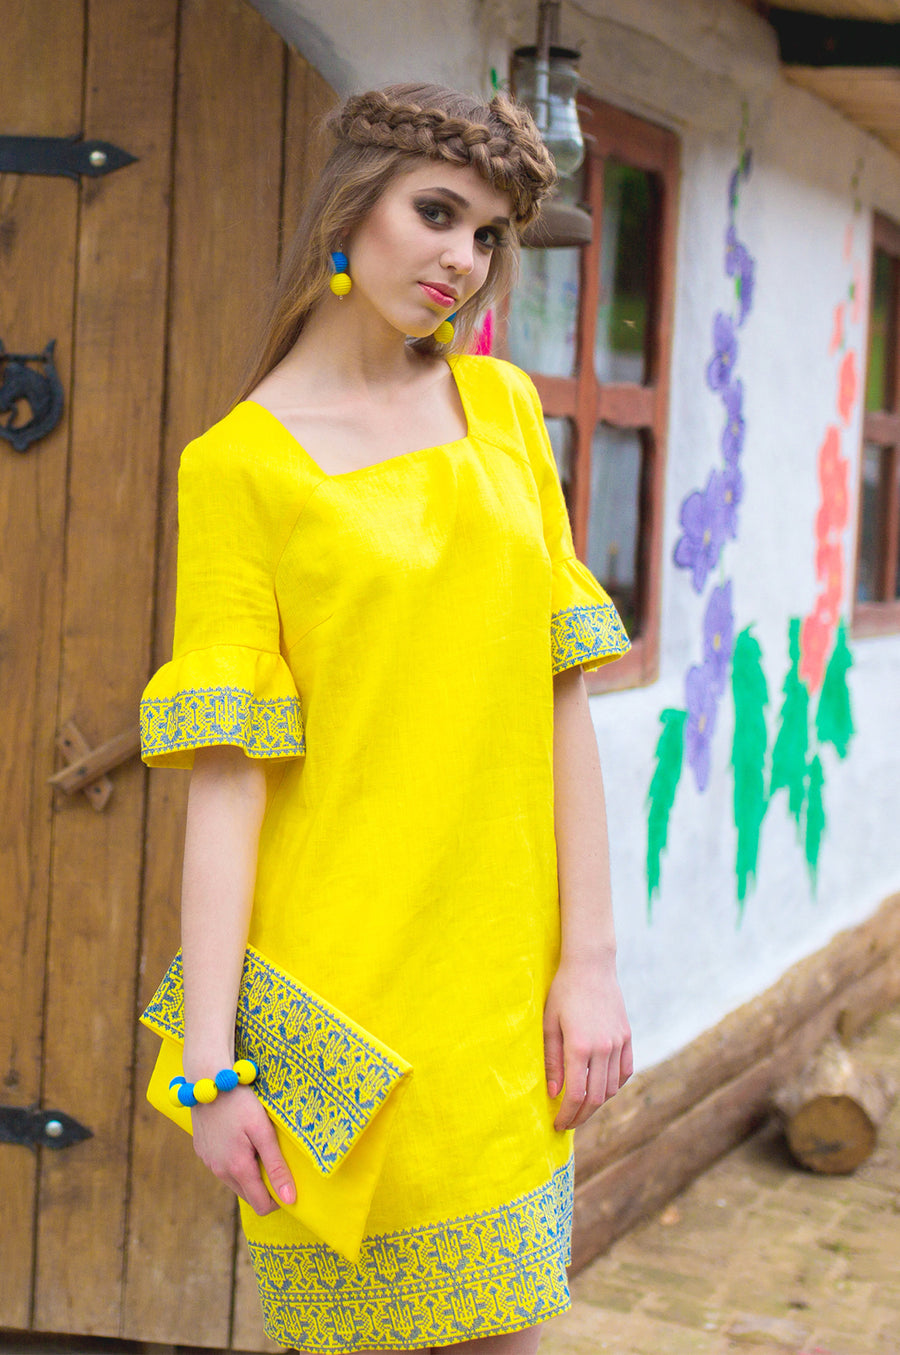 The dress is yellow with embroidery in the national style